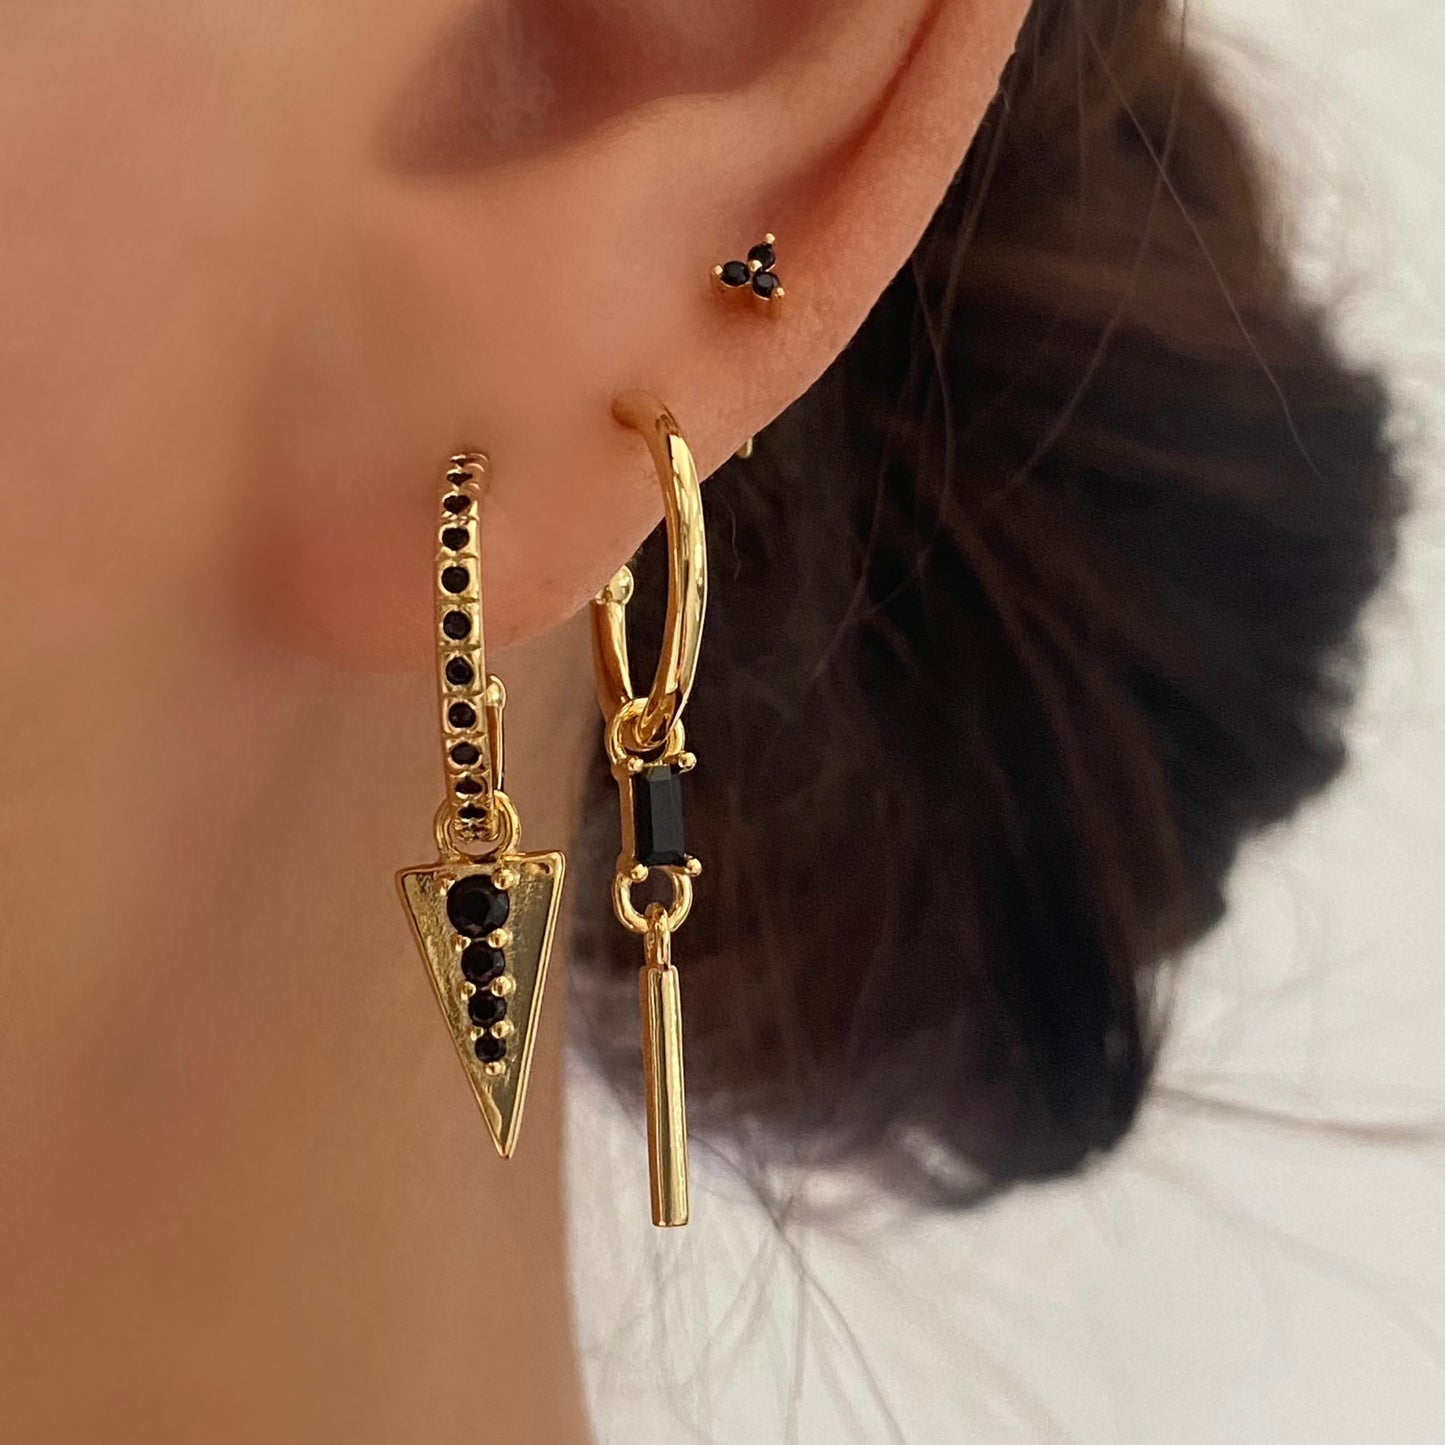 Black Dangly Ear Stack Set, 925 Sterling Silver 3 pieces Gold Earring Set